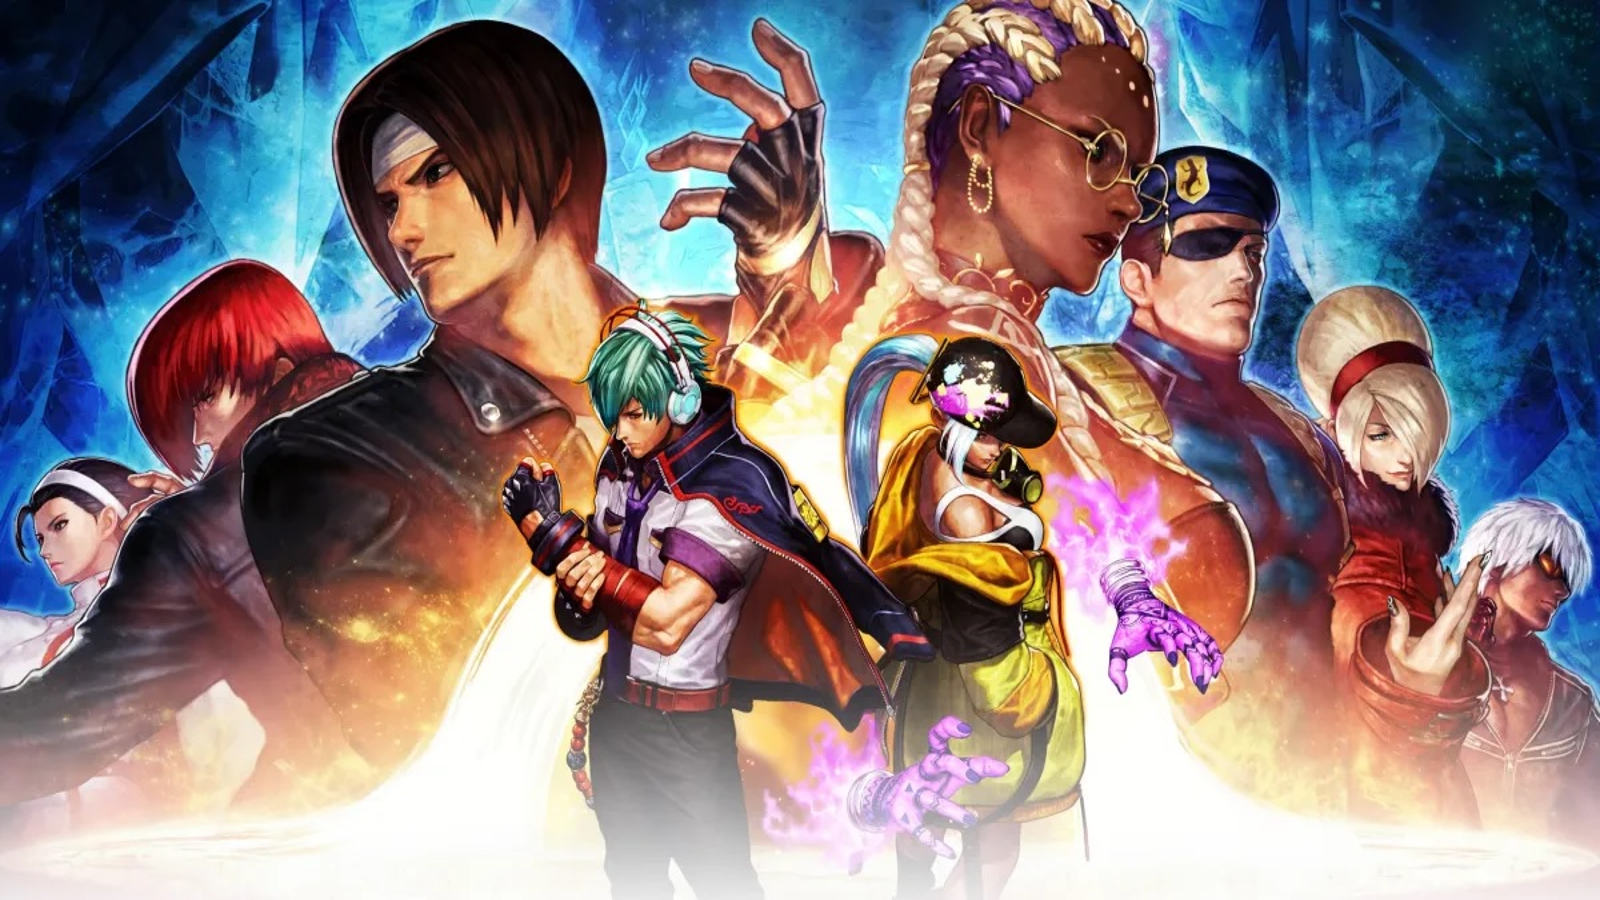 SNK developer confirms King of Fighters 15 is in development